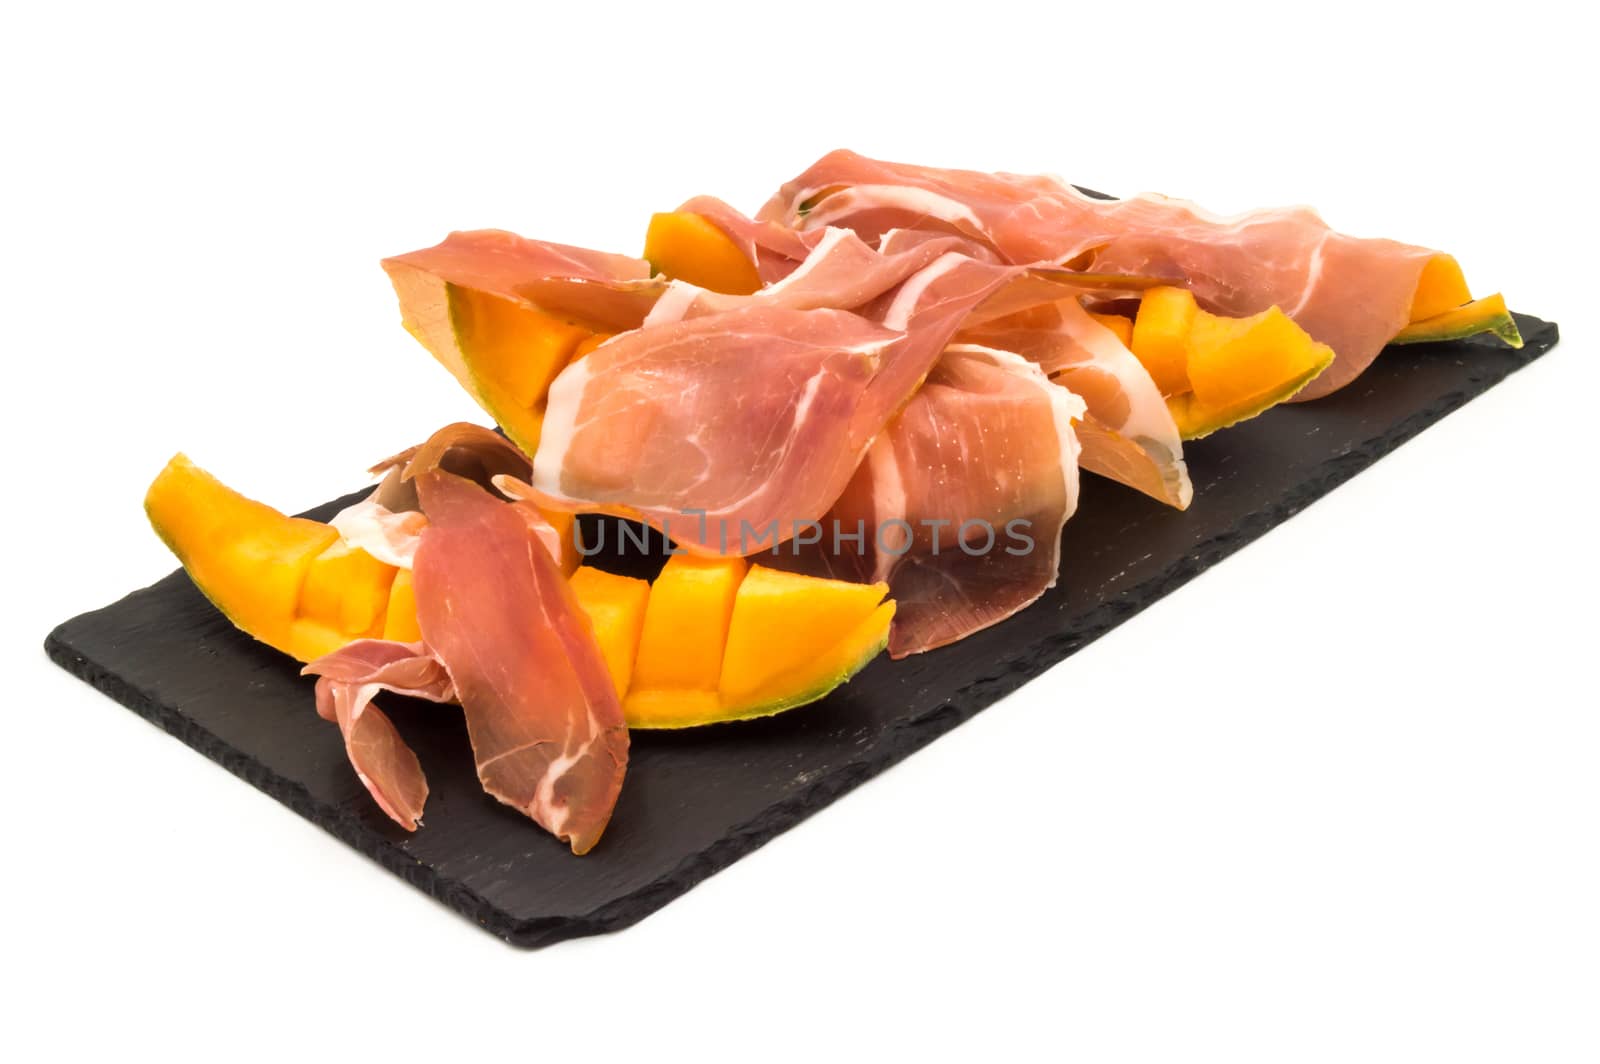 melon with ham placed on a rectangular slate plate on a white background